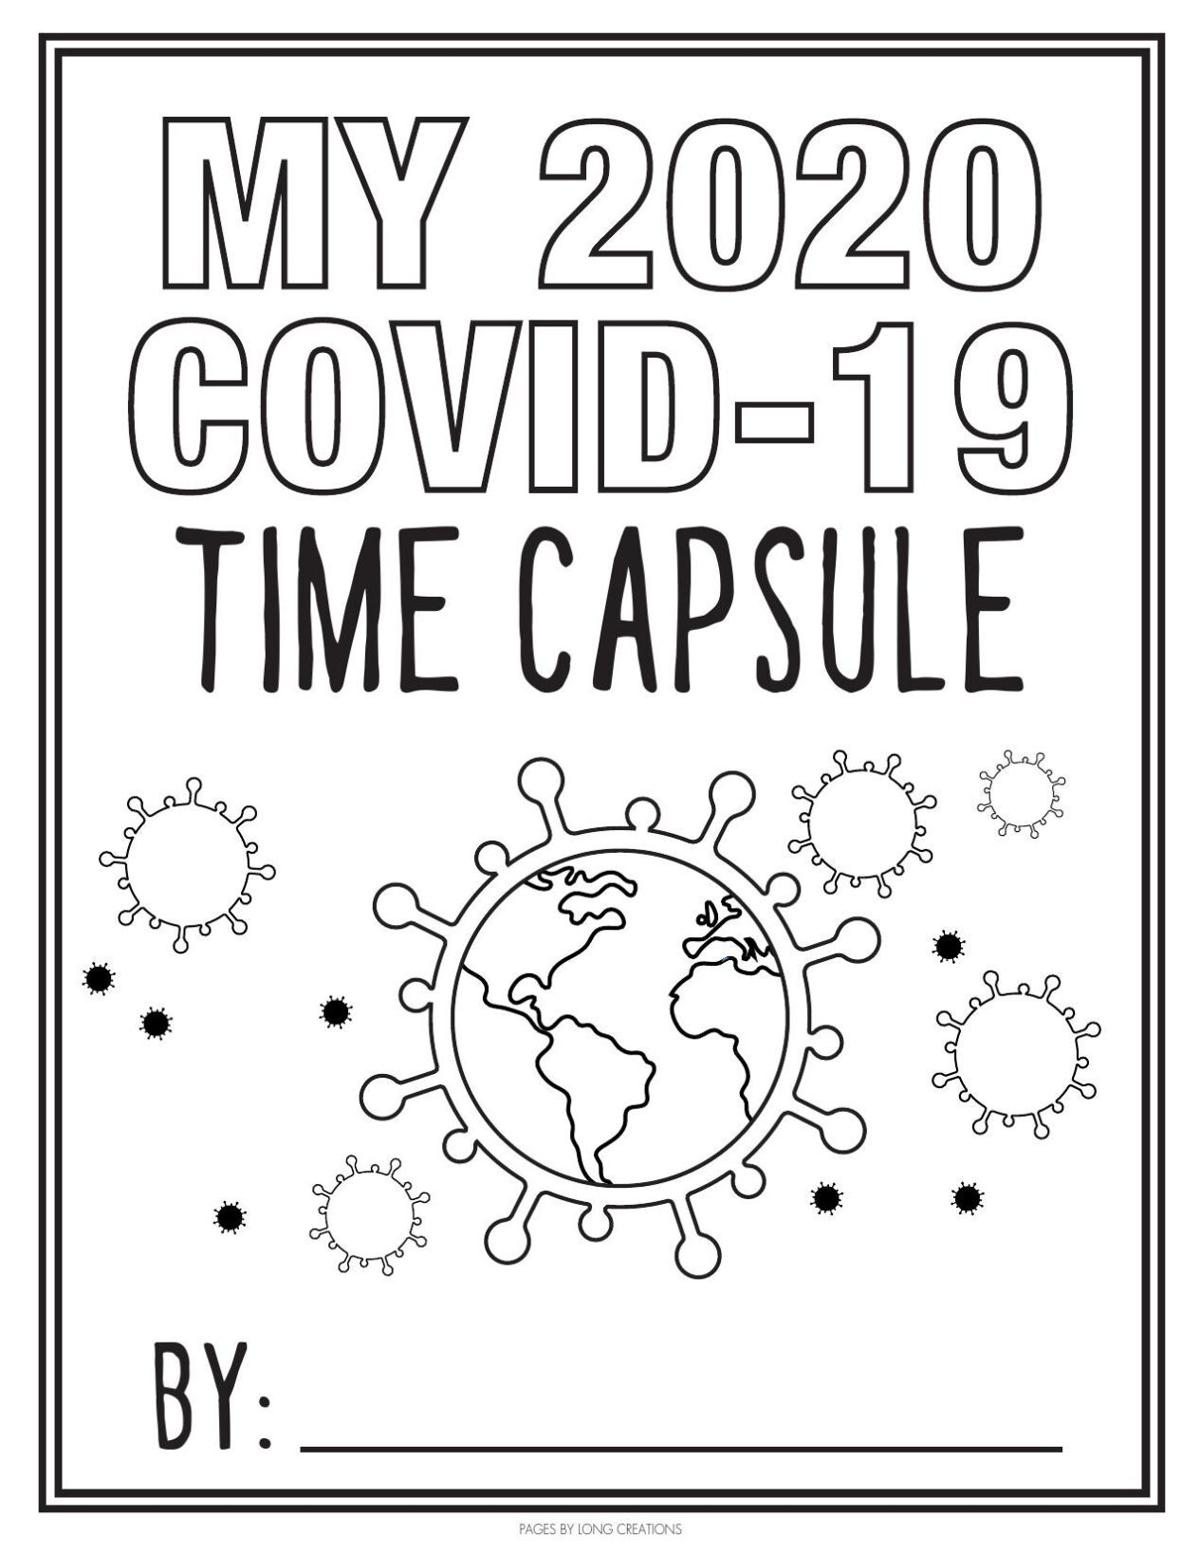 My 2020 Covid-19 Time Capsule